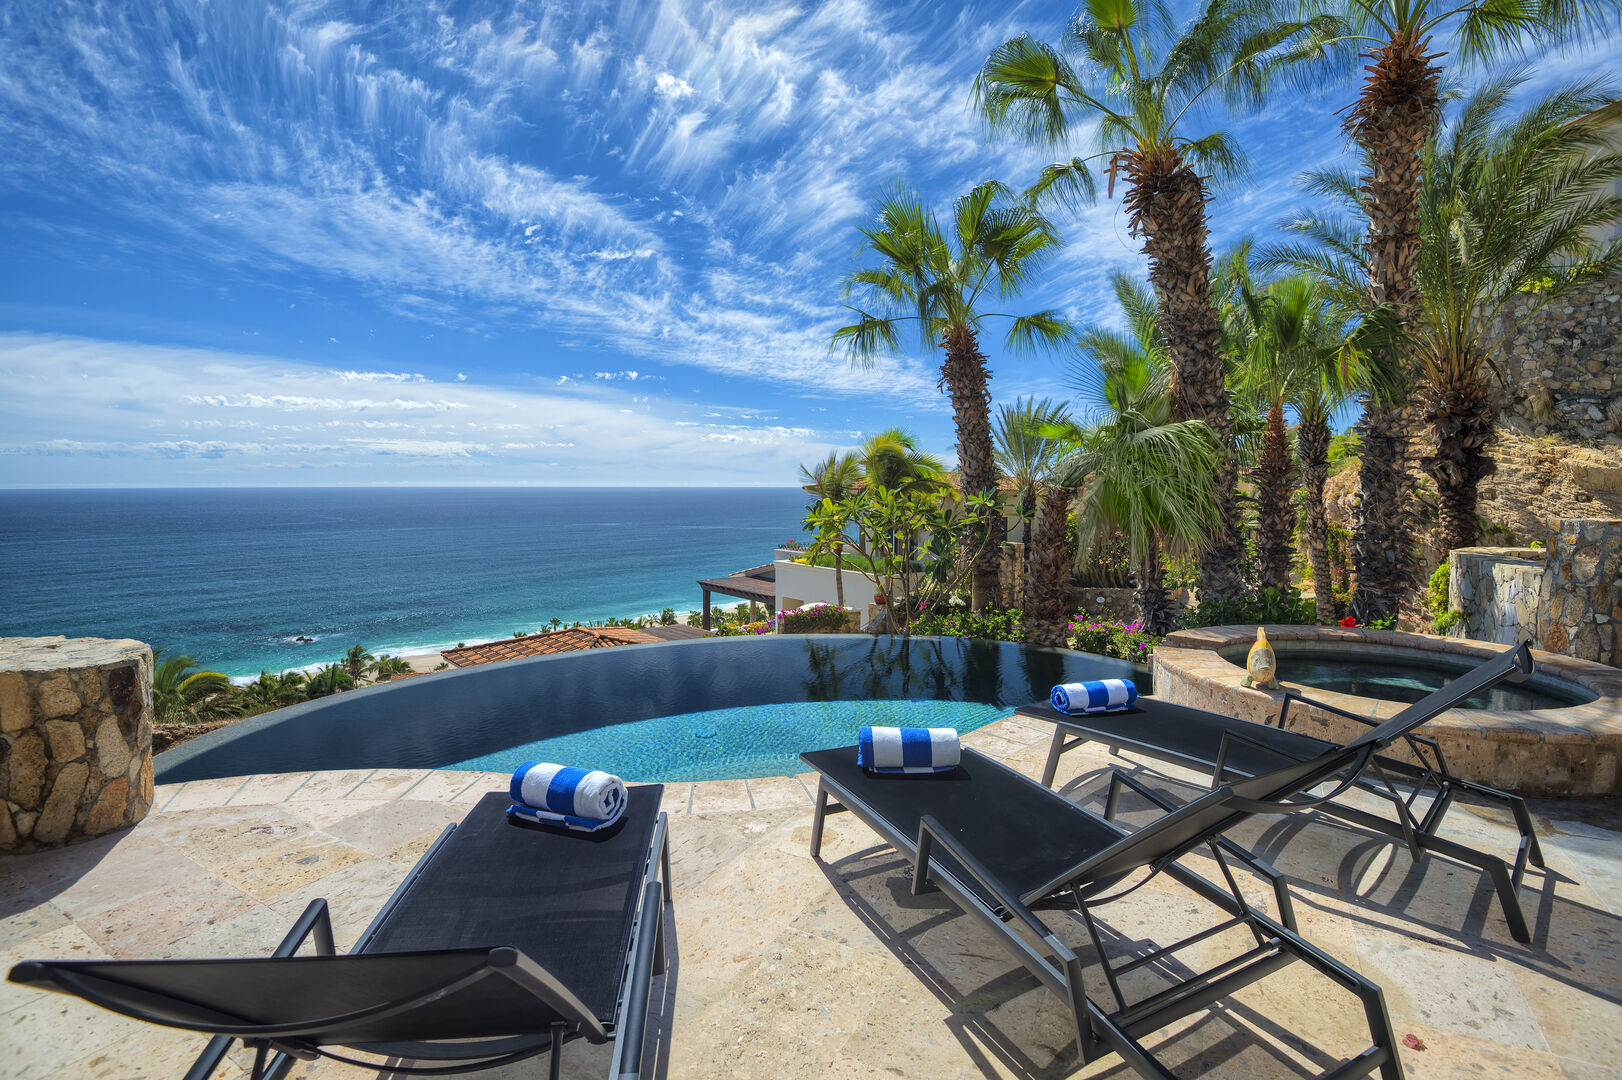 Pool overlooking the ocean at this villa located in Los Cabos